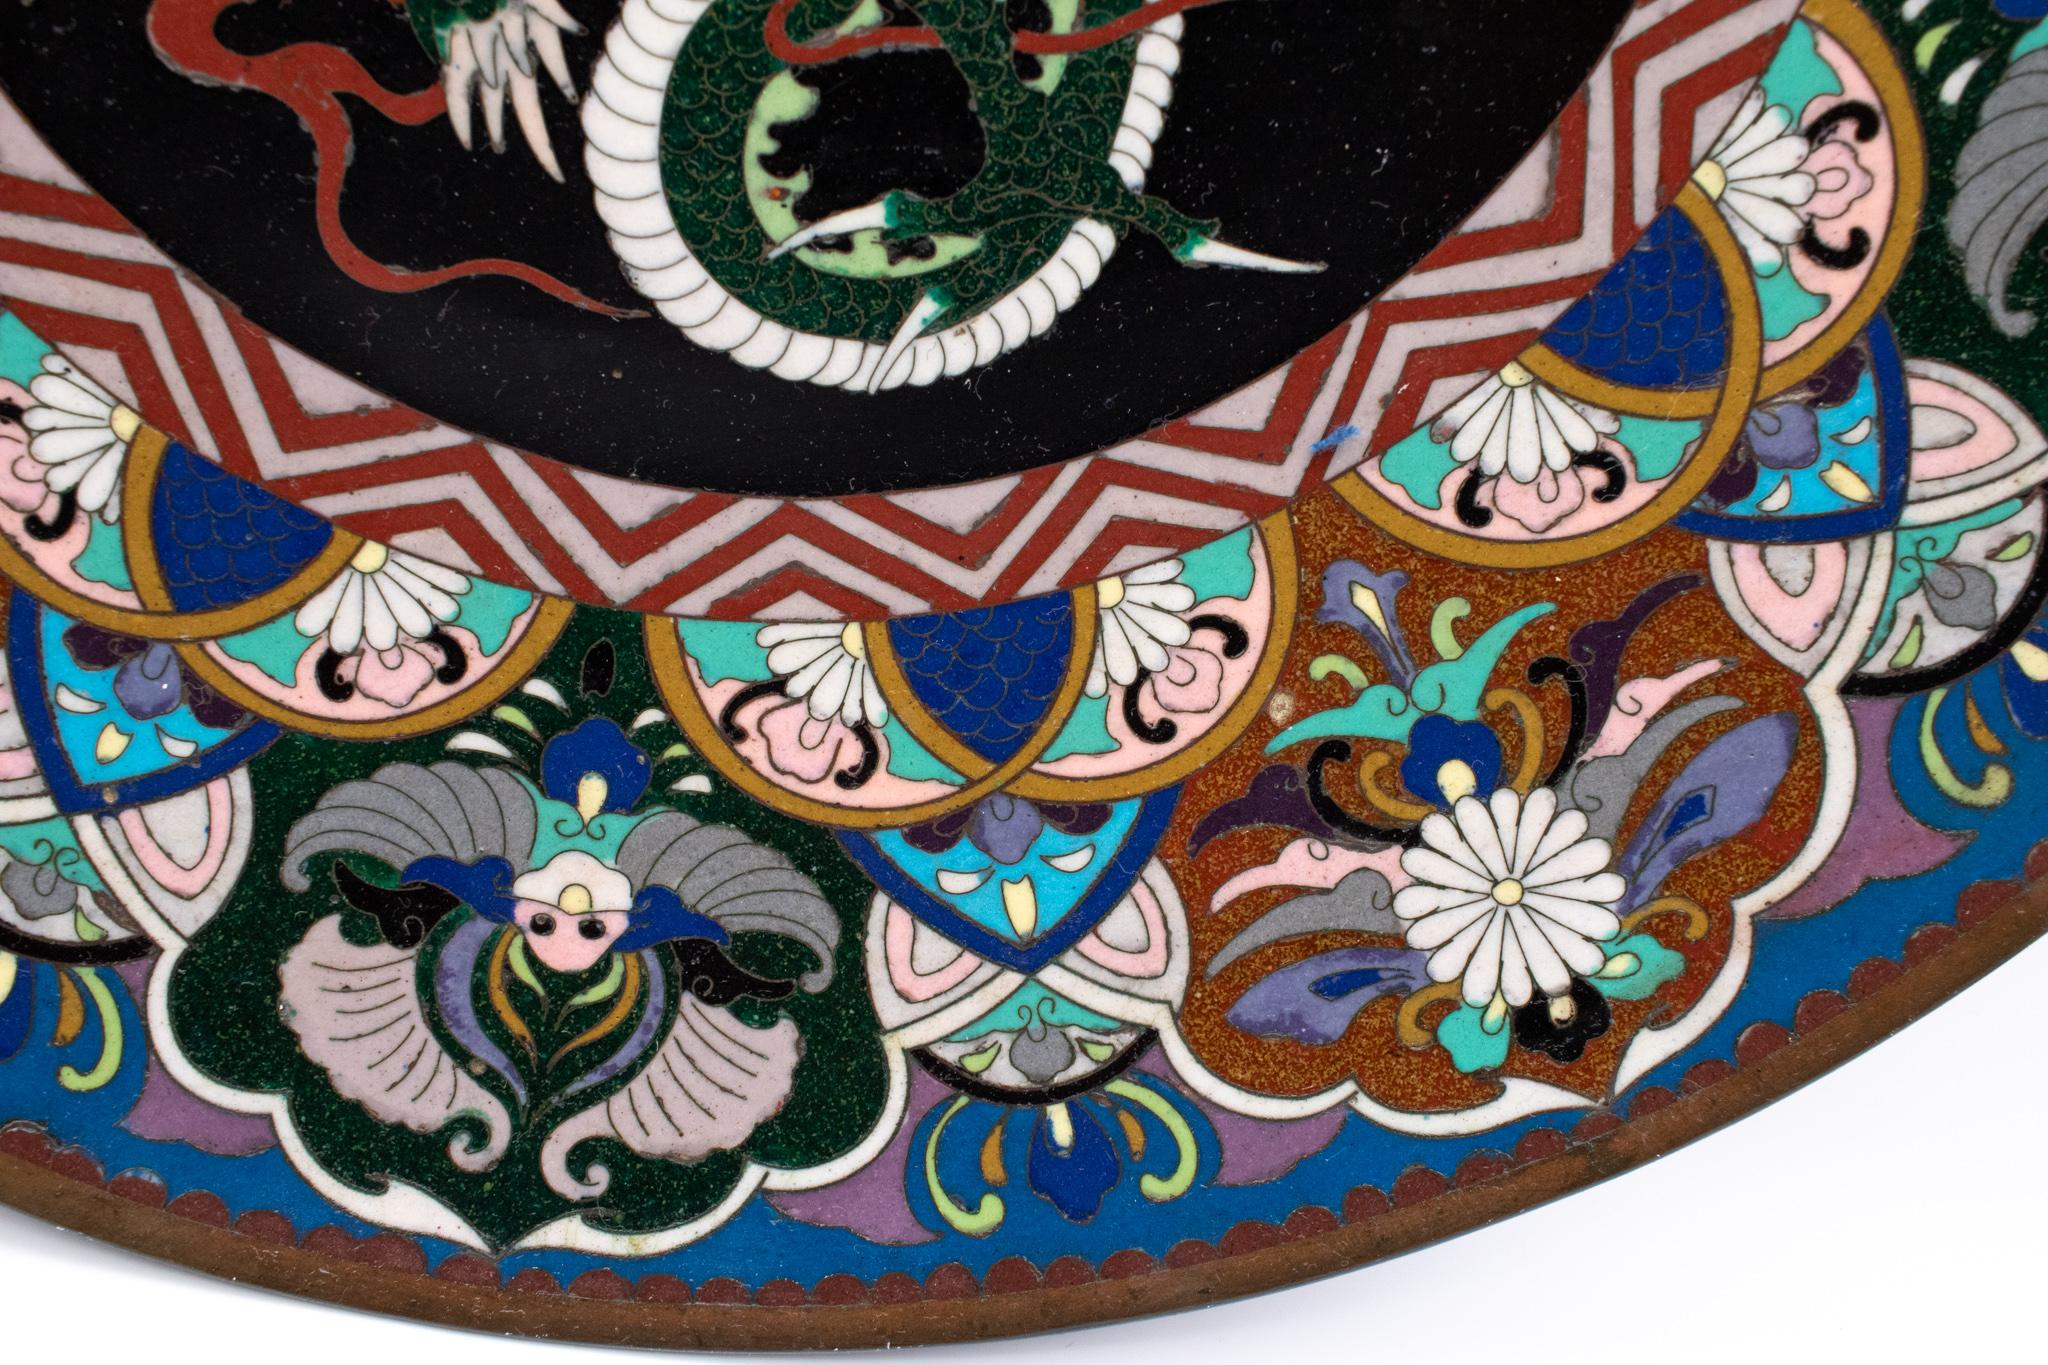 Japan 1900 Meiji Period Charger With A Dragon In Cloisonné Multicolor Enamel In Excellent Condition For Sale In Miami, FL